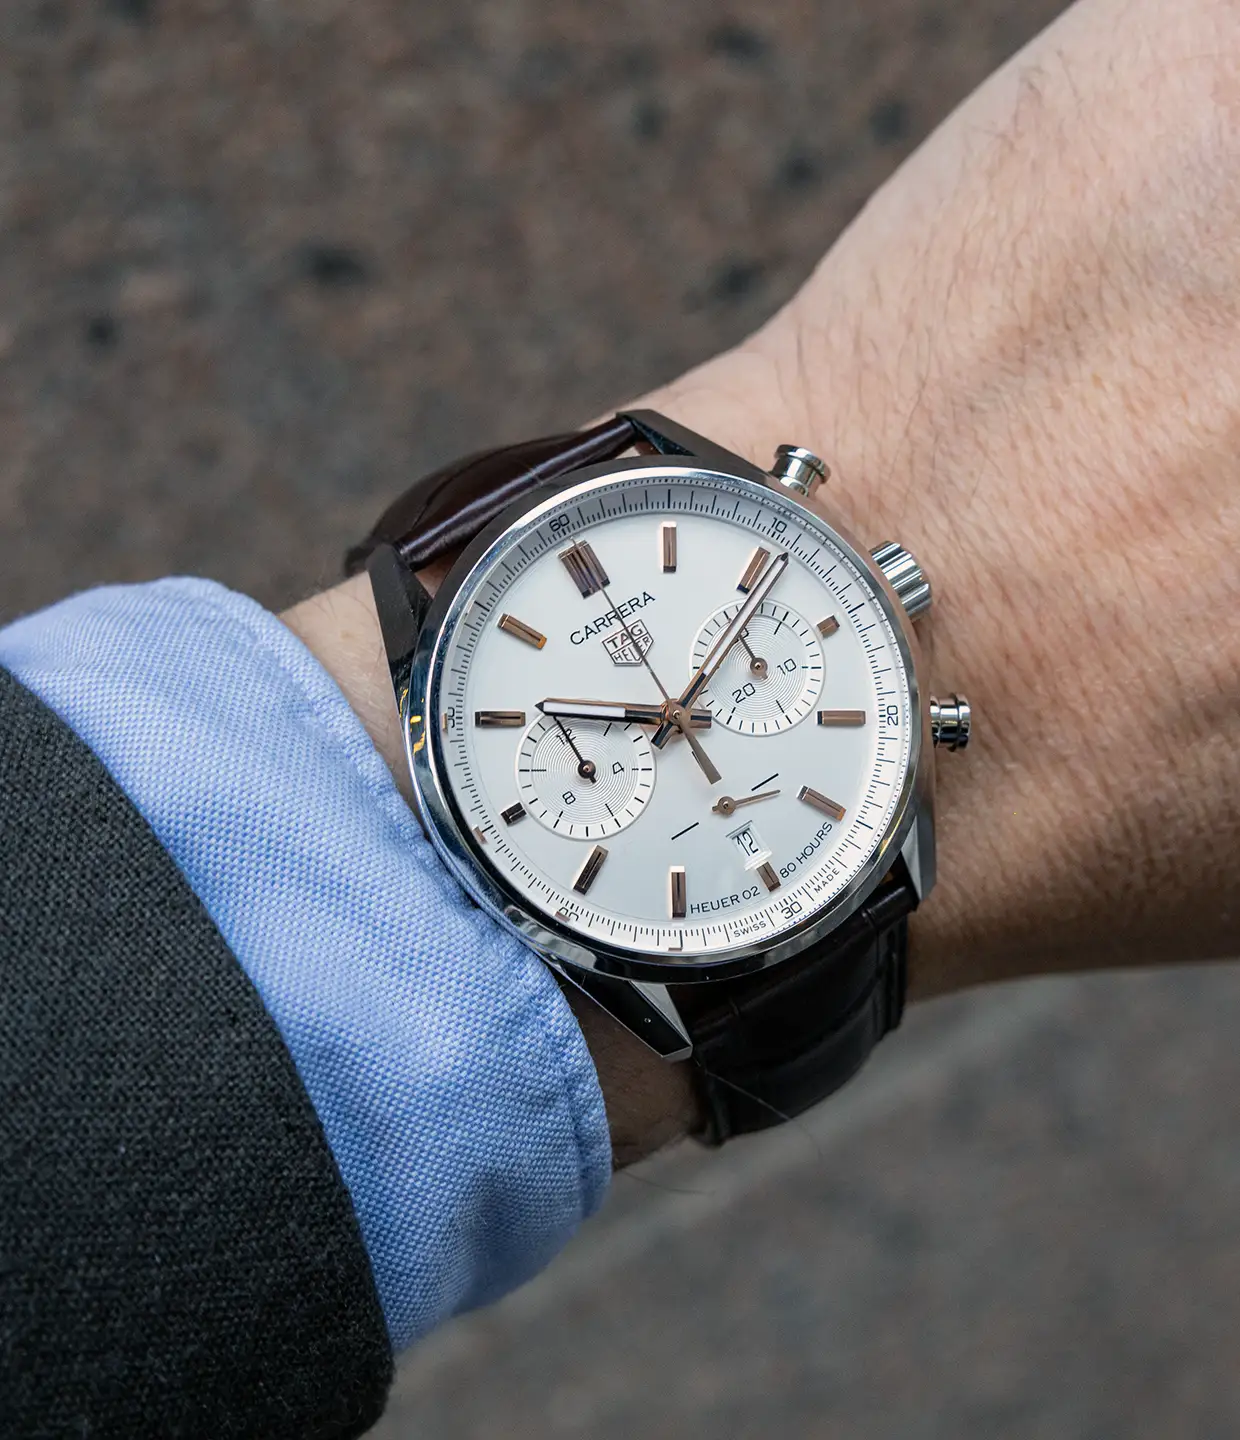 The TAG Heuer Chronograph on the wrist.